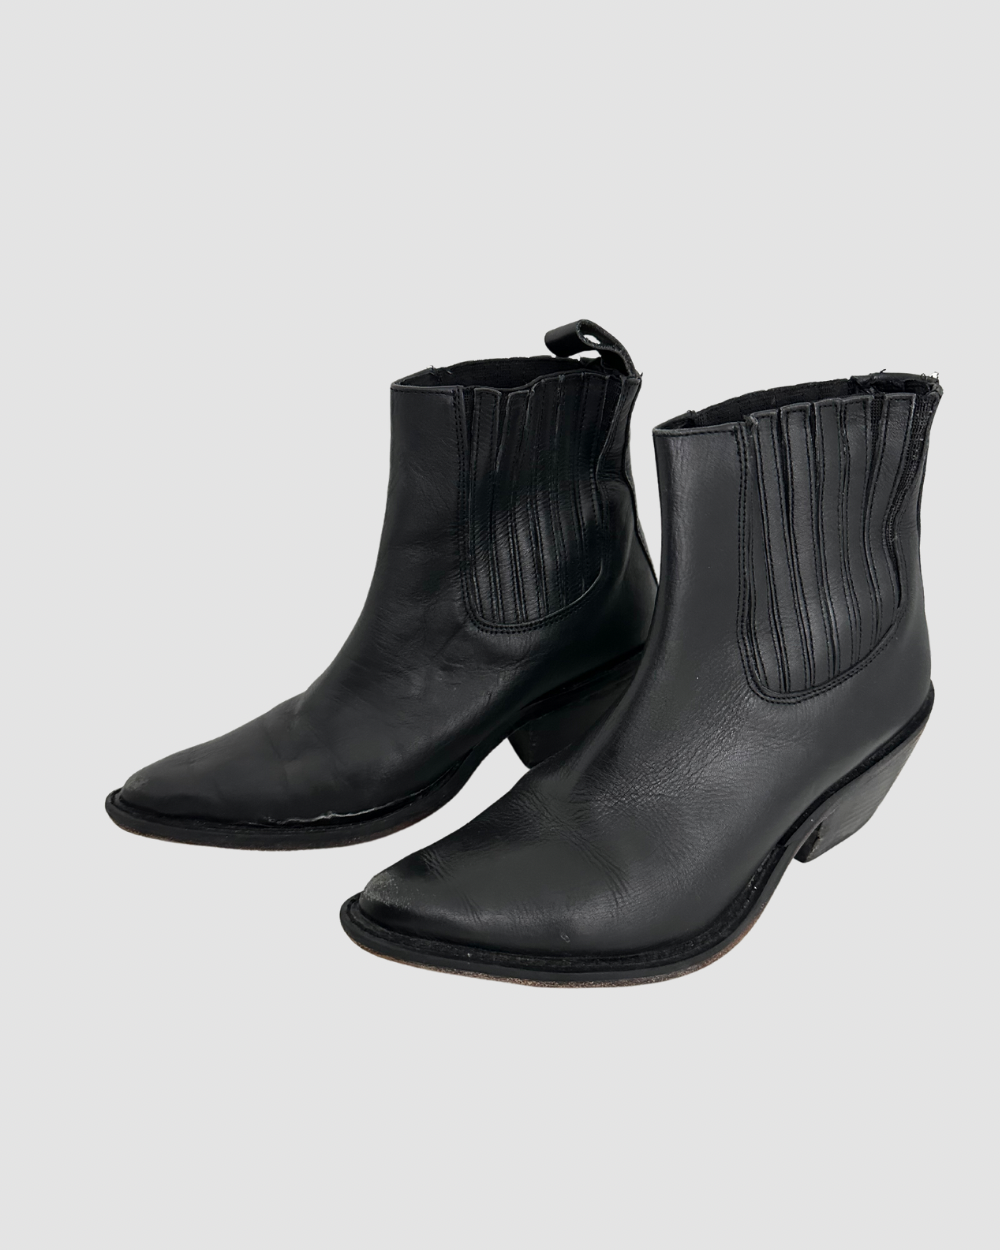 Black Leather Western Boots 9